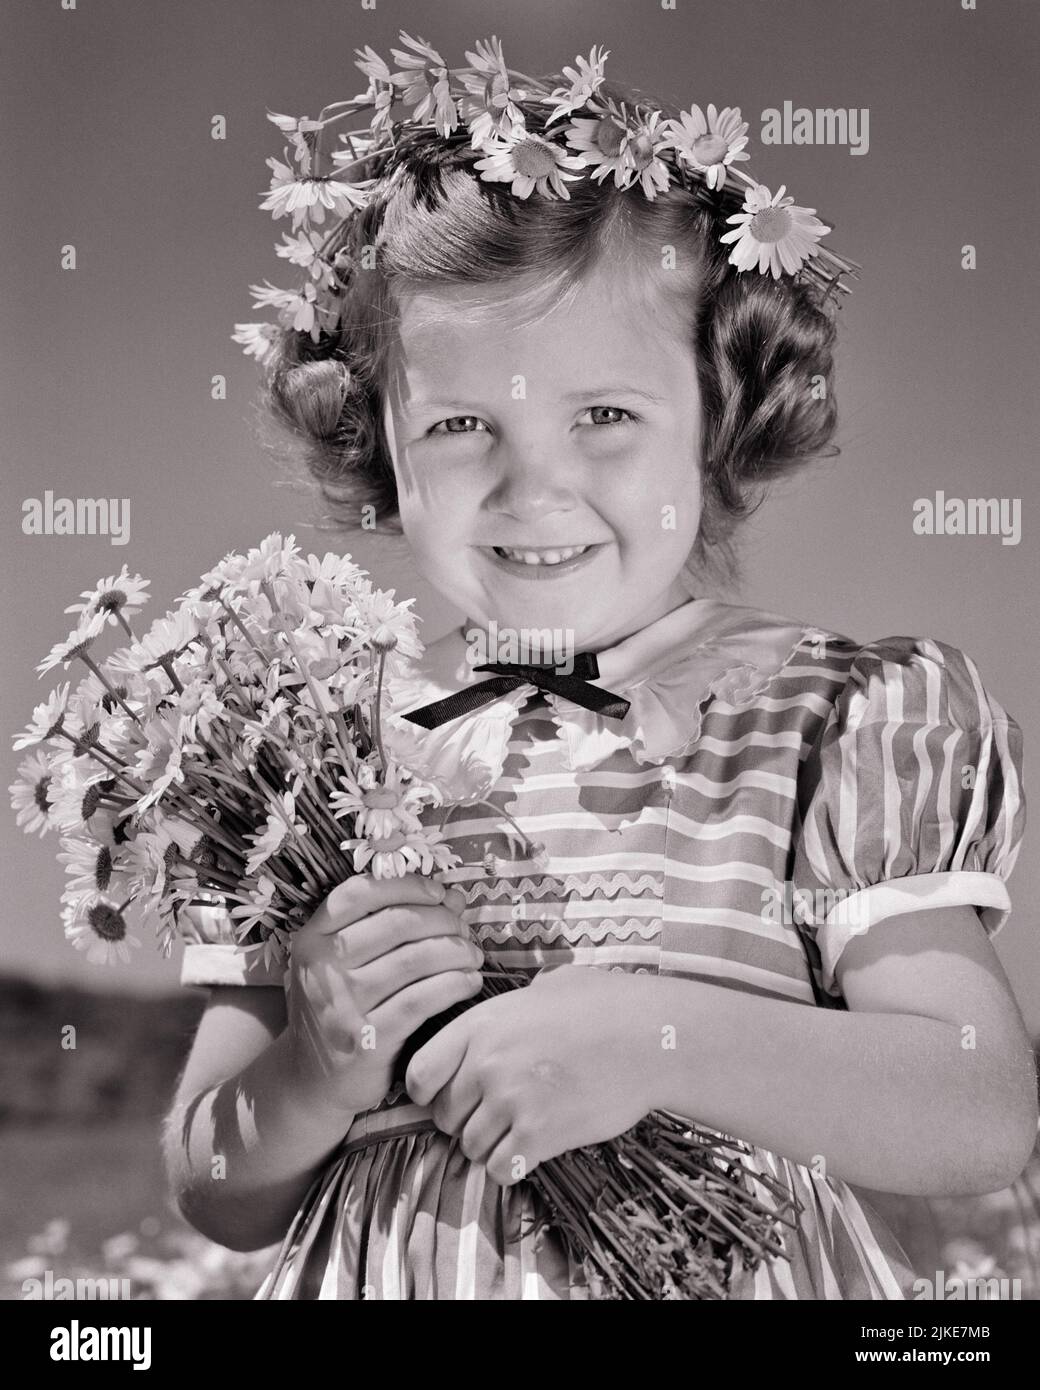 1940s LITTLE GIRL HOLDING A BOUQUET OF DAISIES AND CROWN OF DAISY IN HER HAIR SMILING WEARING A STRIPED DRESS LOOKING AT CAMERA - j1905 HAR001 HARS WINNING FLORAL RURAL HEALTHINESS NATURE COPY SPACE GARLAND HALF-LENGTH INSPIRATION CONFIDENCE B&W DAISY SUMMERTIME EYE CONTACT DAISIES DREAMS HAPPINESS CHEERFUL AND PRIDE SMILES JOYFUL STYLISH PLEASANT AGREEABLE CHARMING GROWTH JUVENILES LOVABLE PLEASING SEASON ADORABLE APPEALING BLACK AND WHITE CAUCASIAN ETHNICITY HAR001 OLD FASHIONED Stock Photo